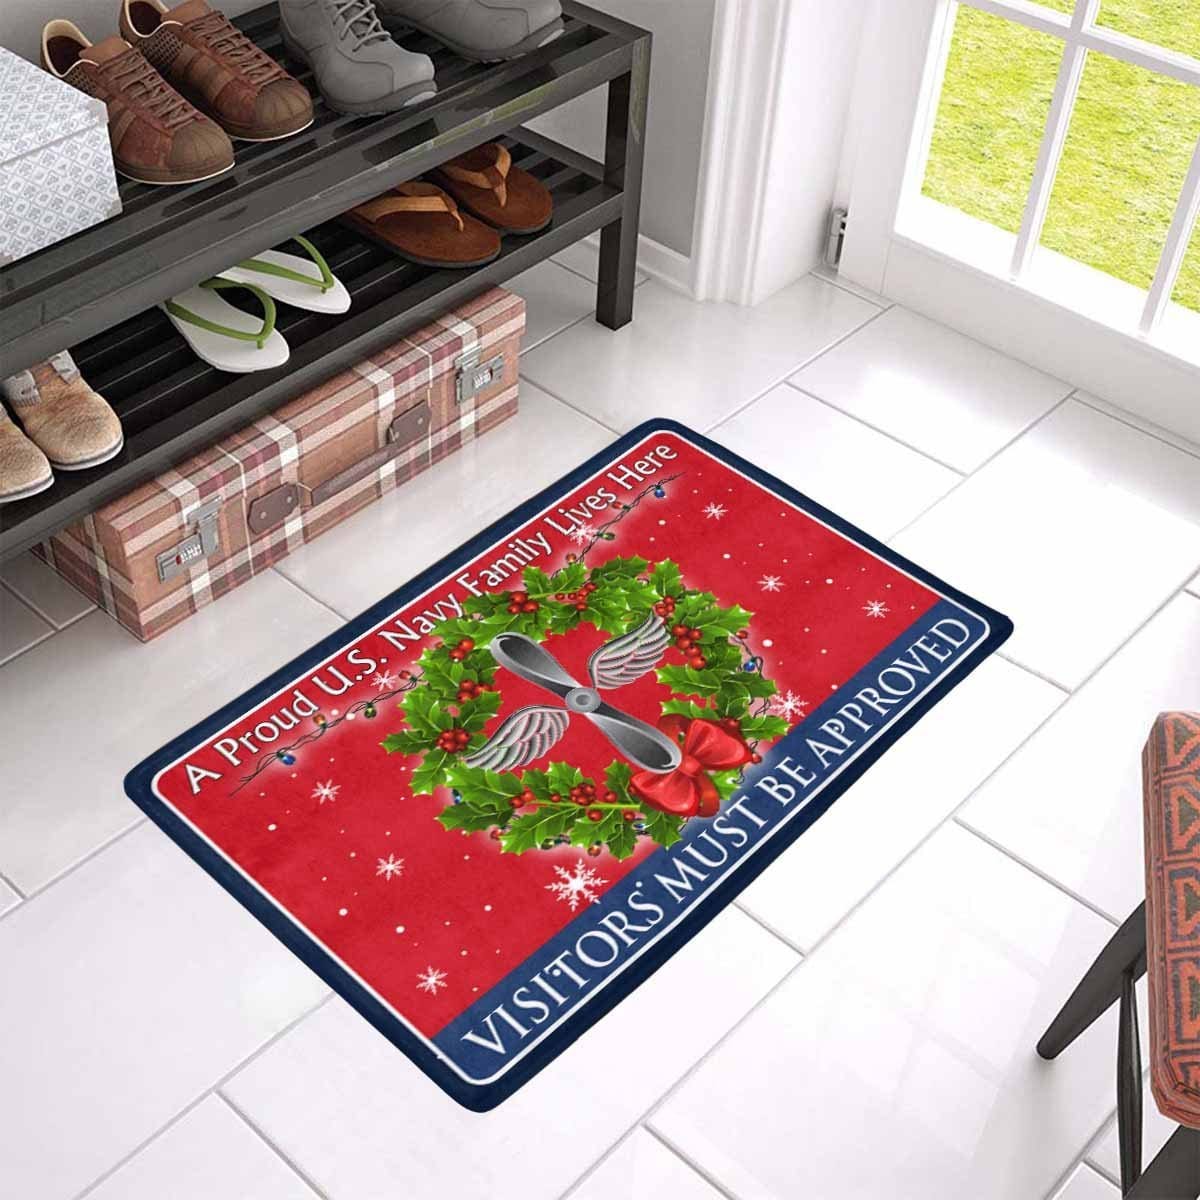 U.S Navy Aviation machinist's mate Navy AD - Visitors must be approved - Christmas Doormat-Doormat-Navy-Rate-Veterans Nation